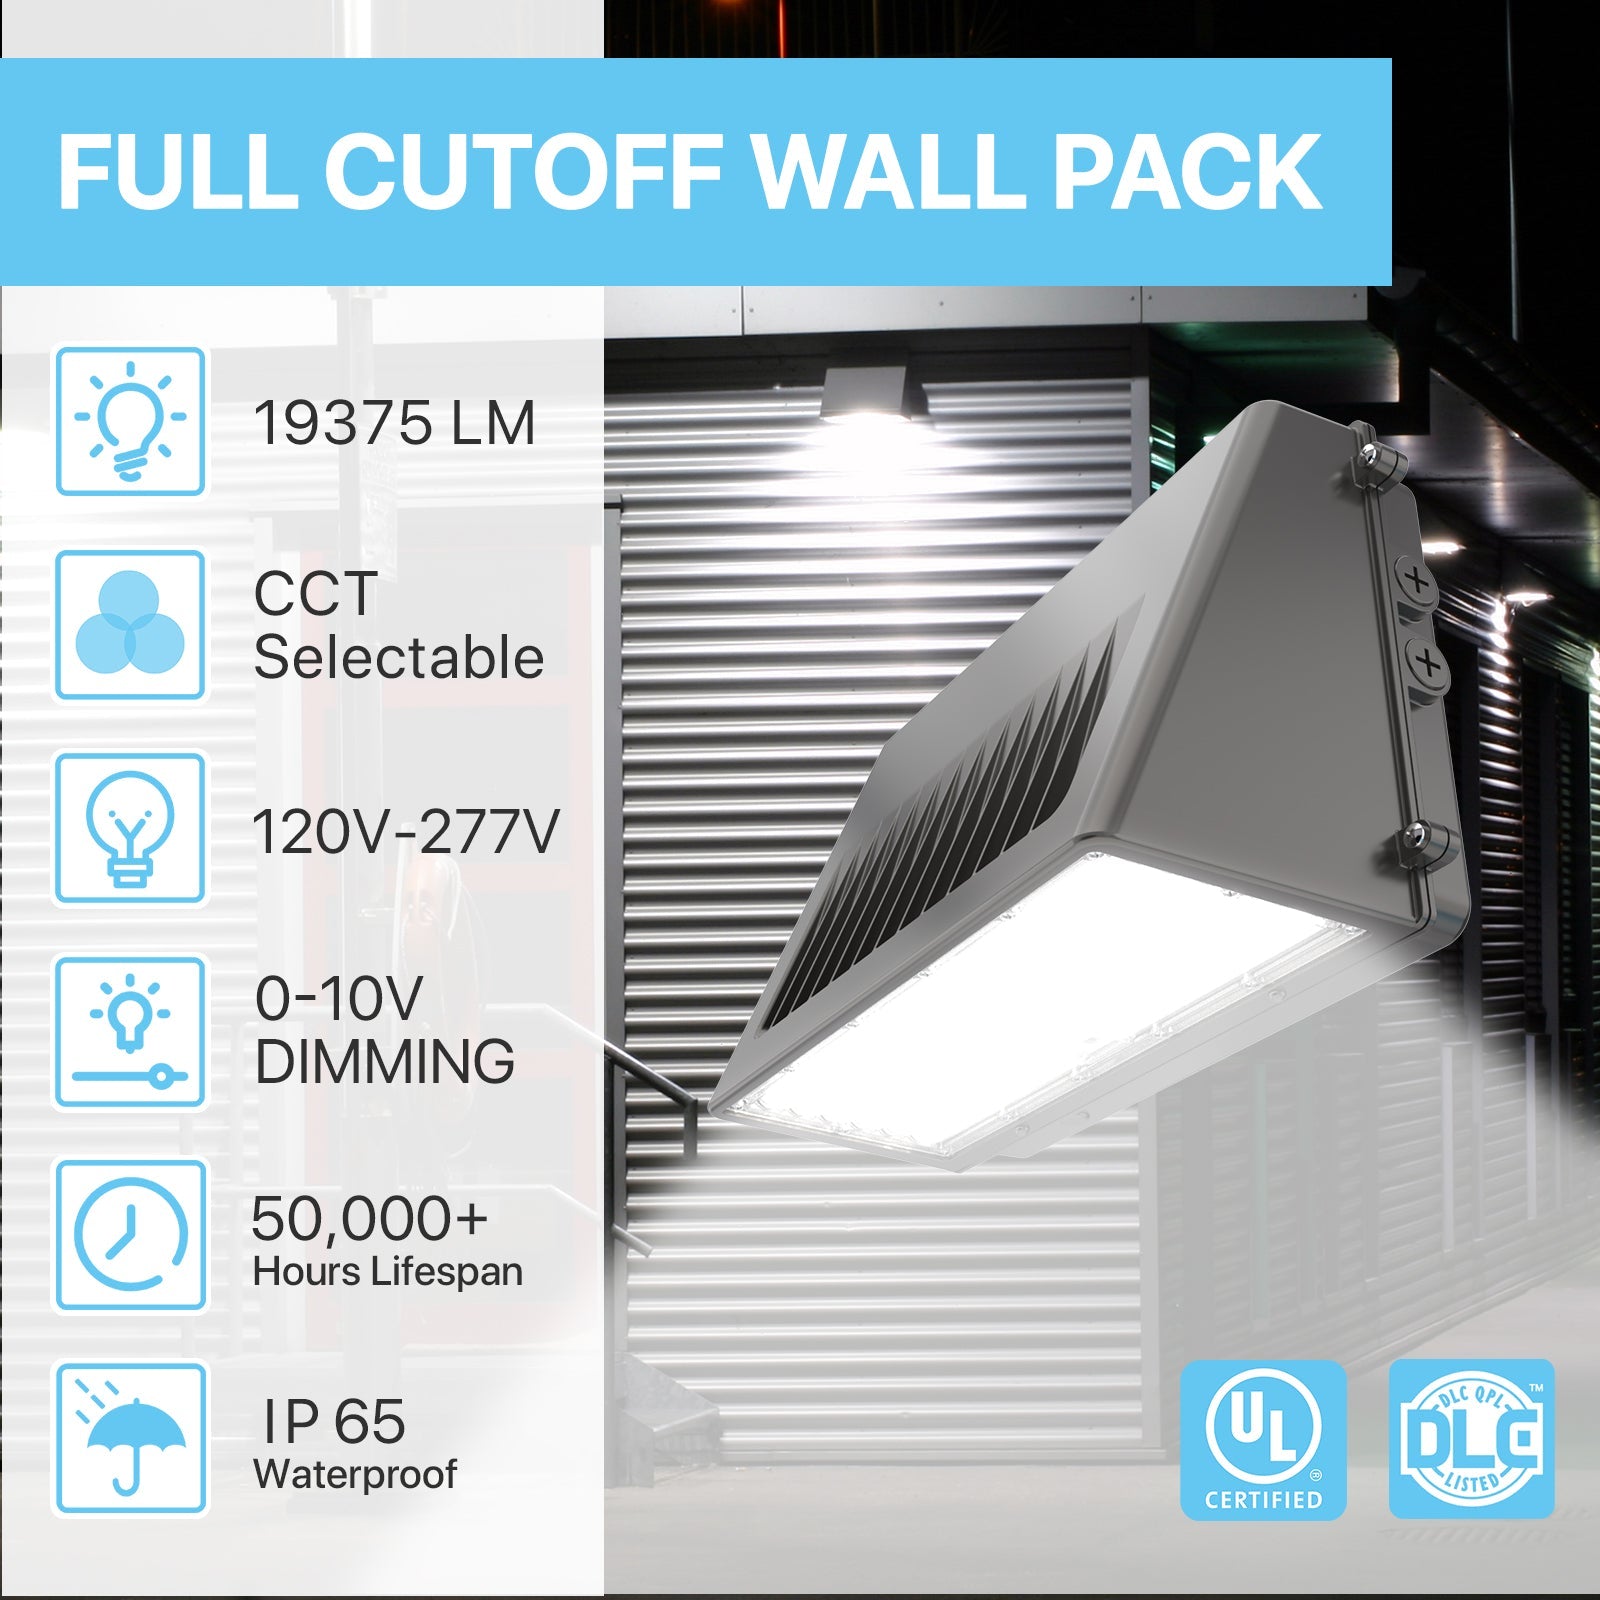 Wholesale Full Cutoff Wall Pack Lights - WPD Series, with Photocell 63W-125W Wattage 3000/4000/5000K Selectable